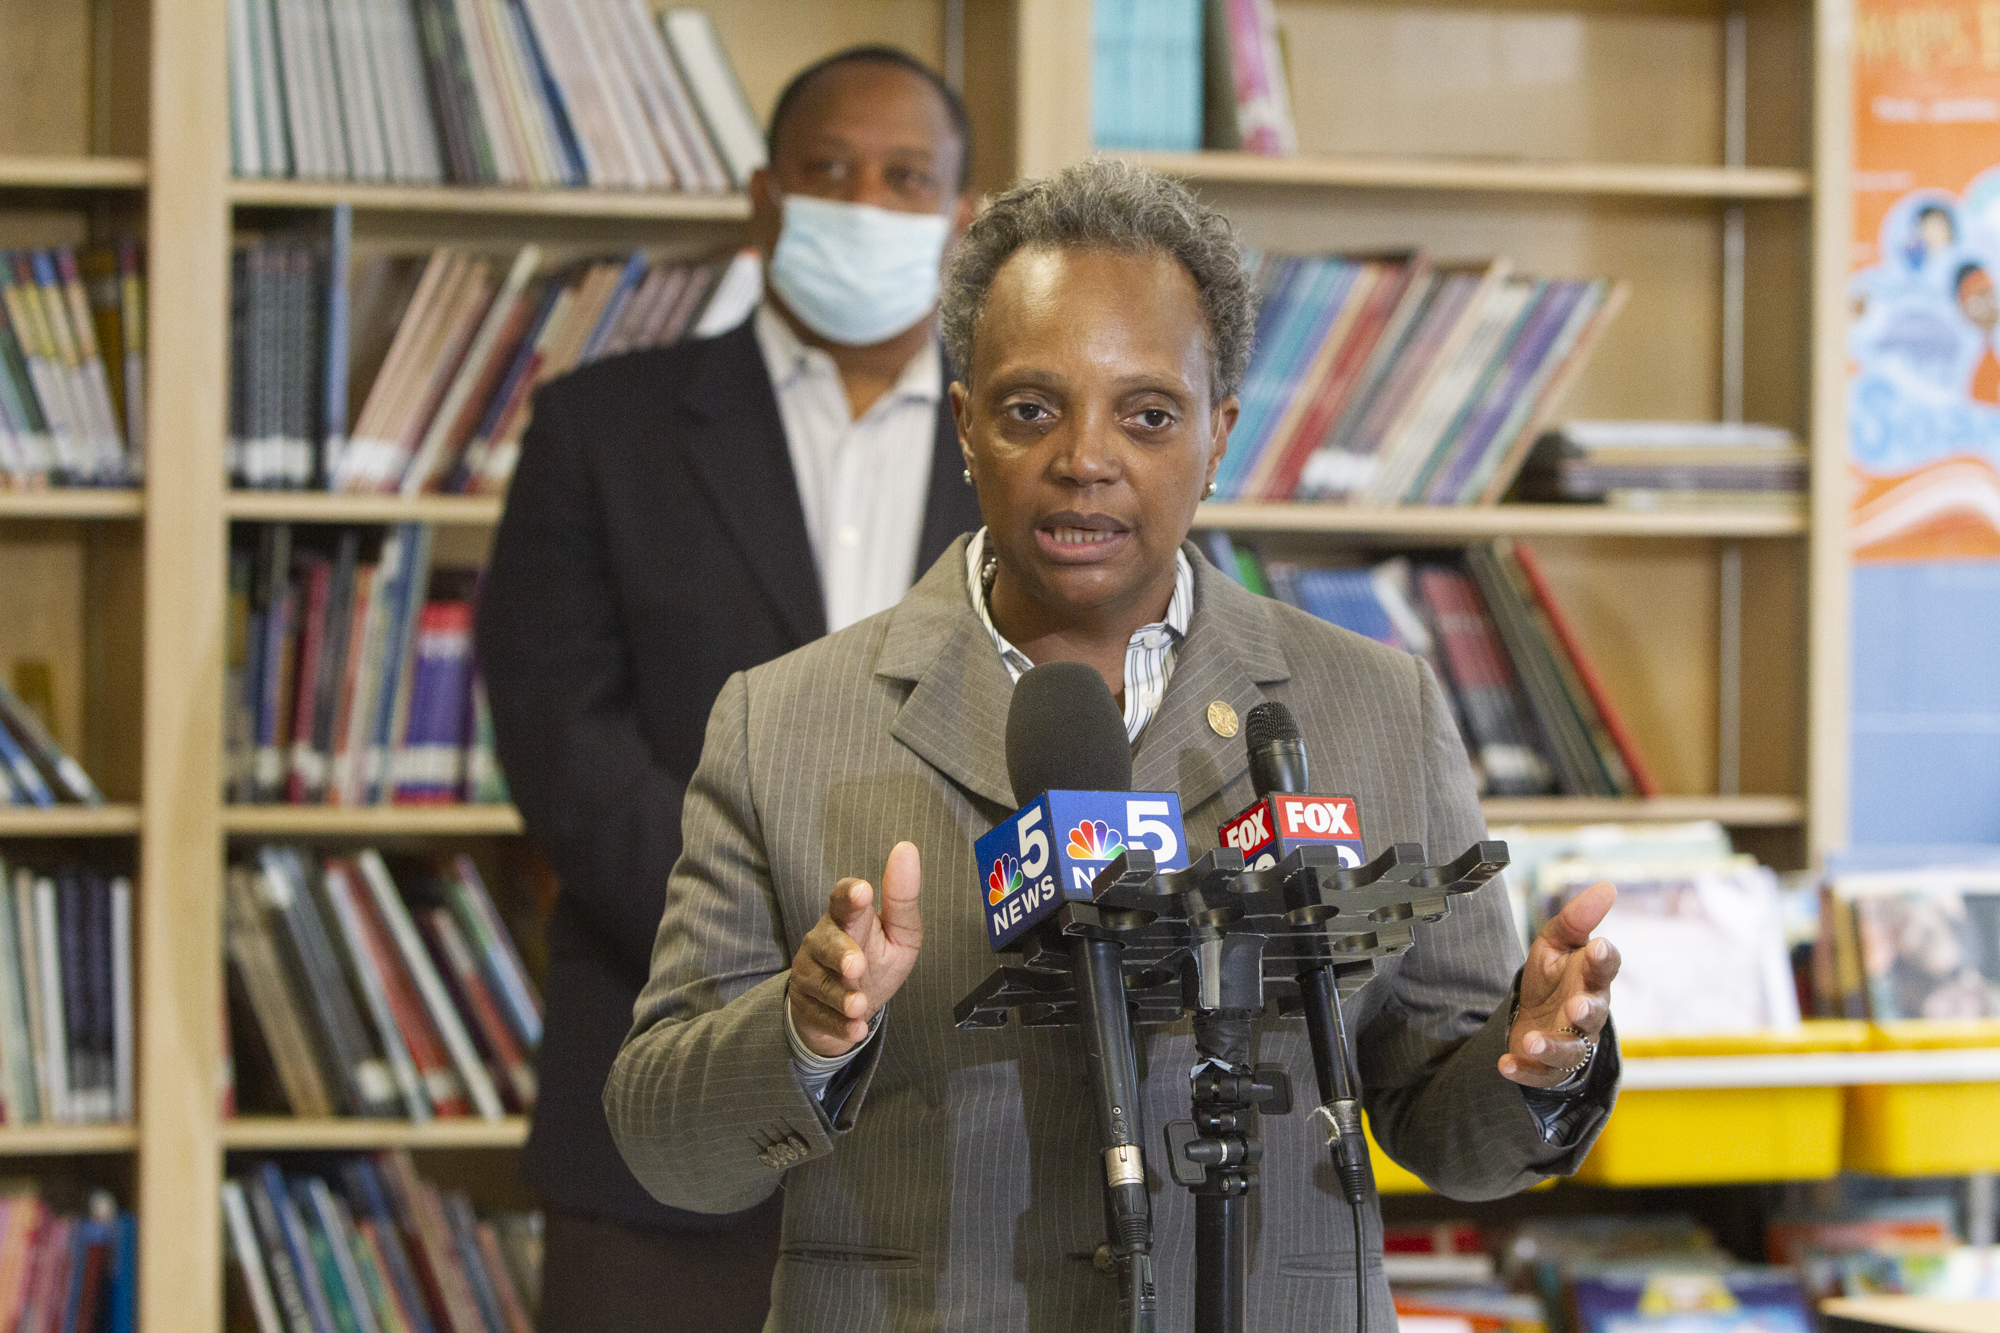 Mayor Lori Lightfoot talking into microphones at a press conference.